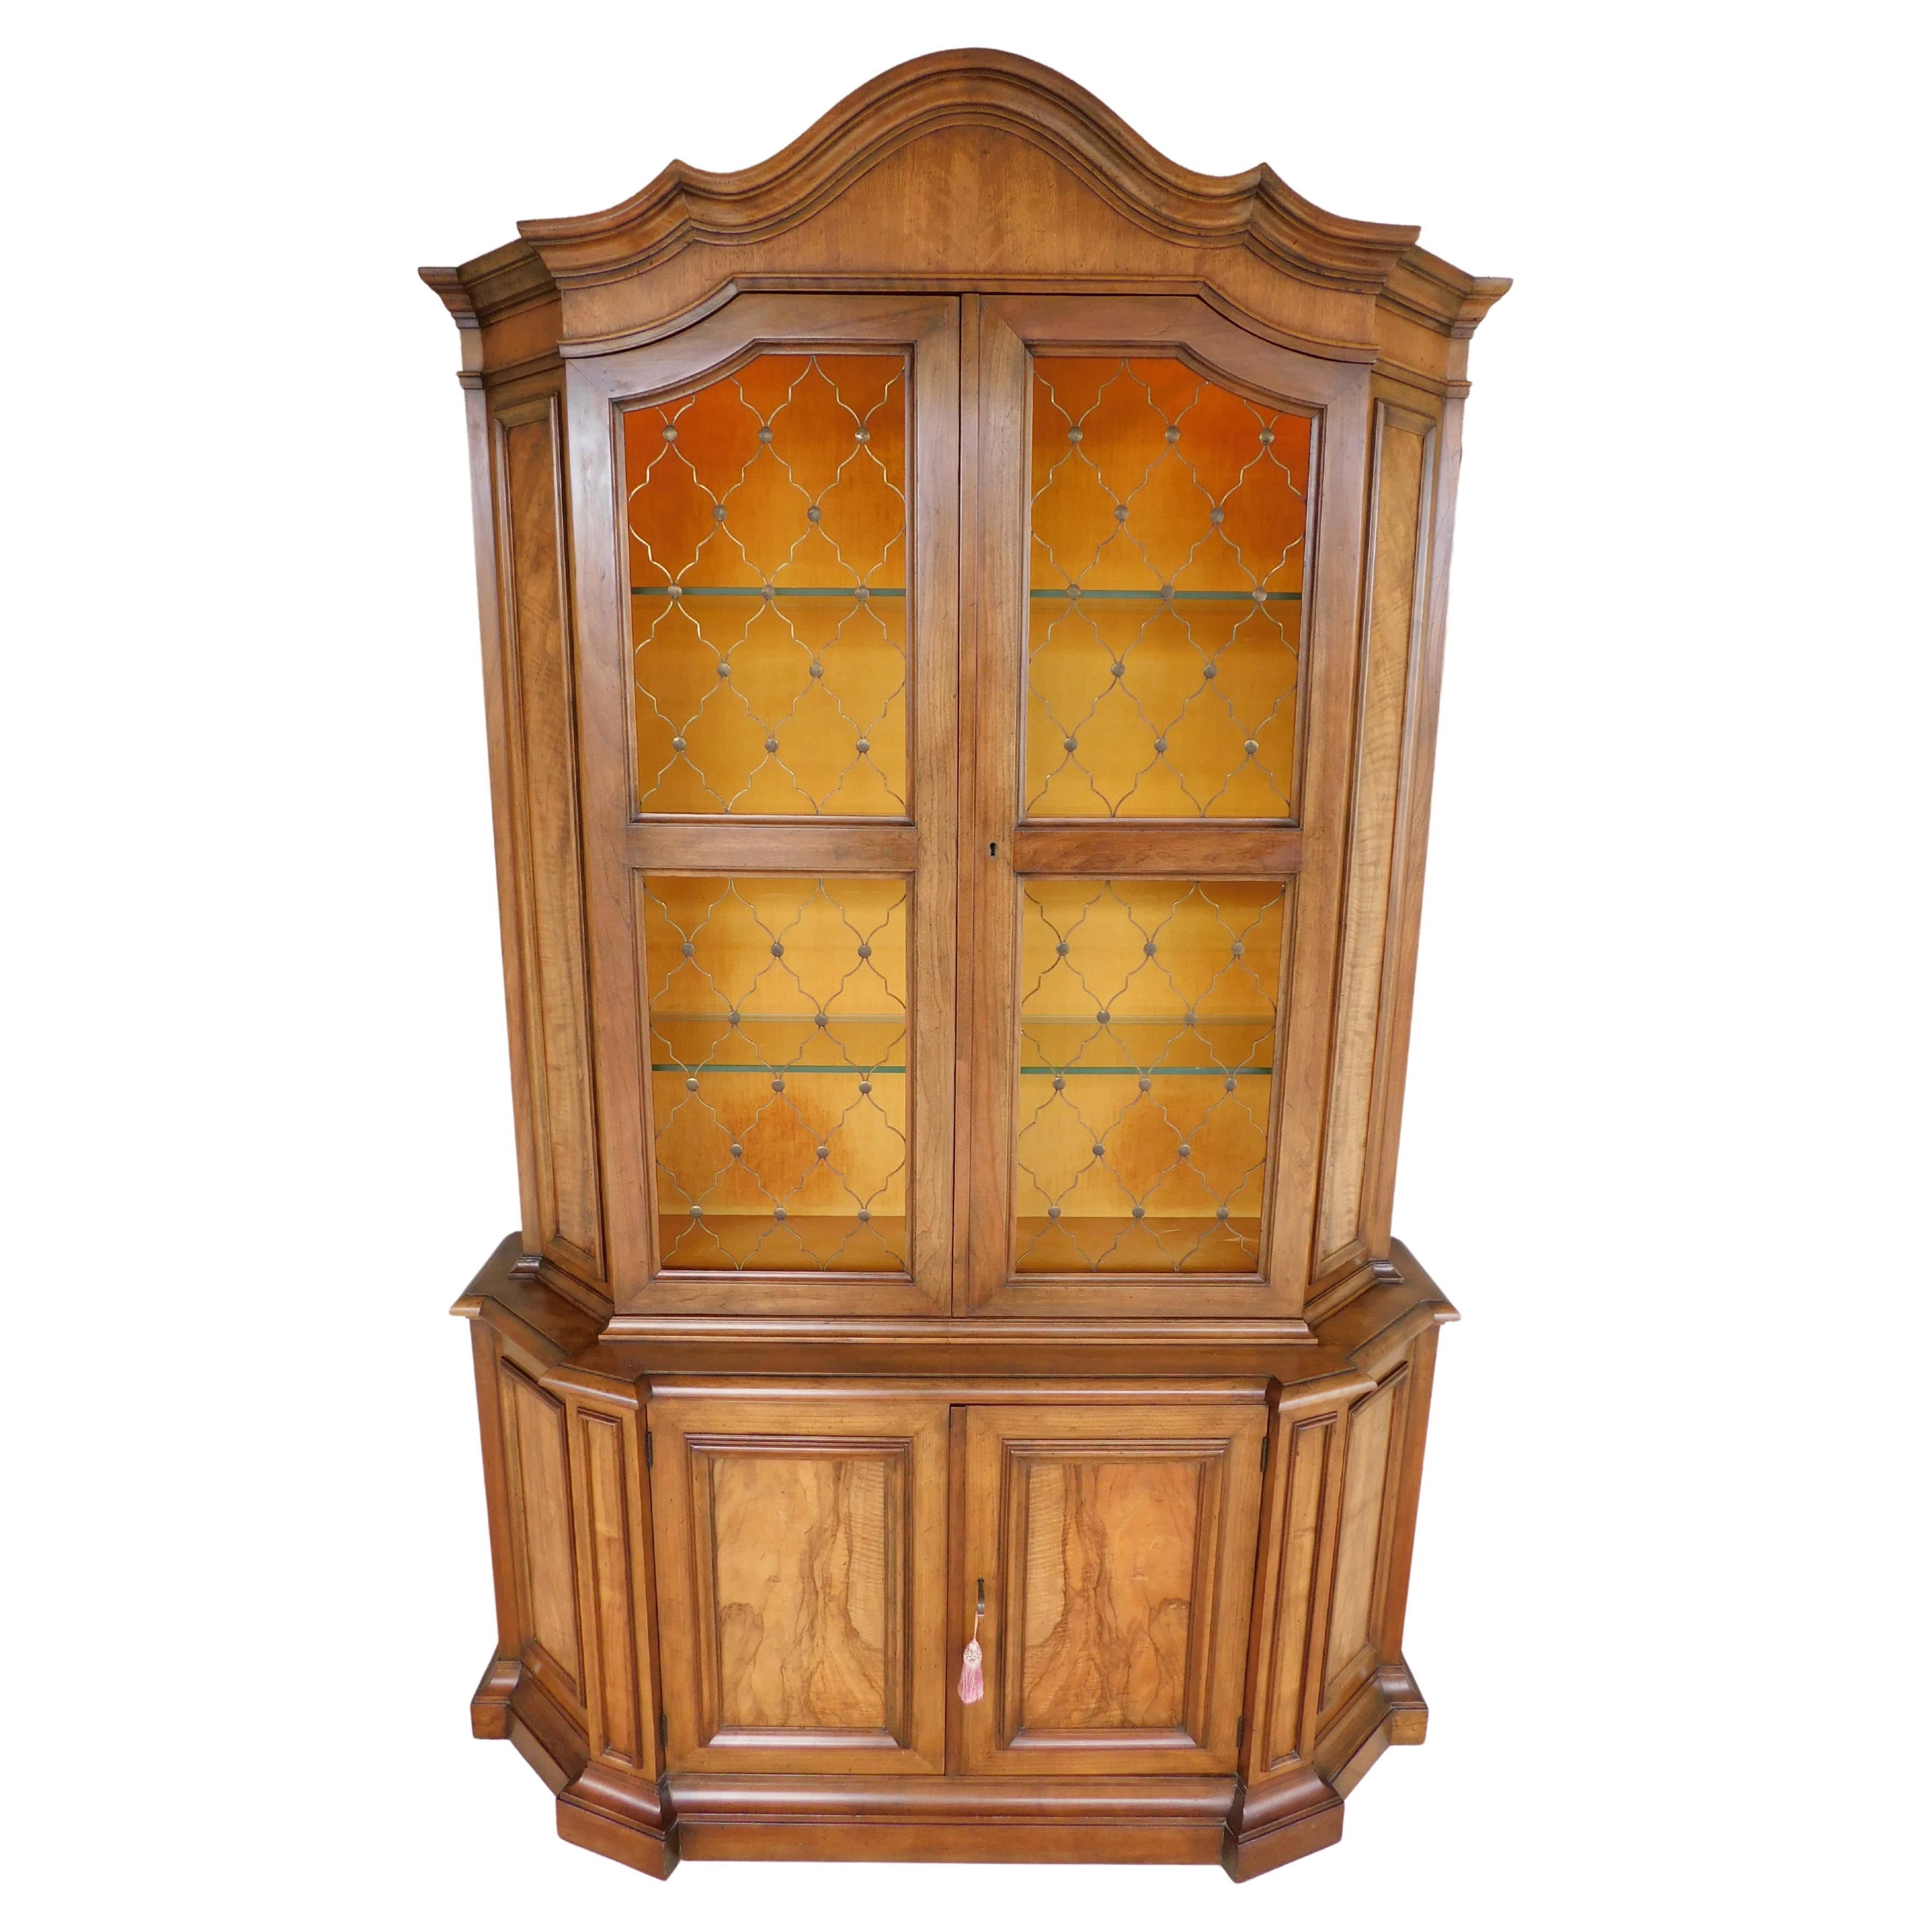 Midcentury French Regency Style Baker Furniture Lighted Display Cabinet For Sale